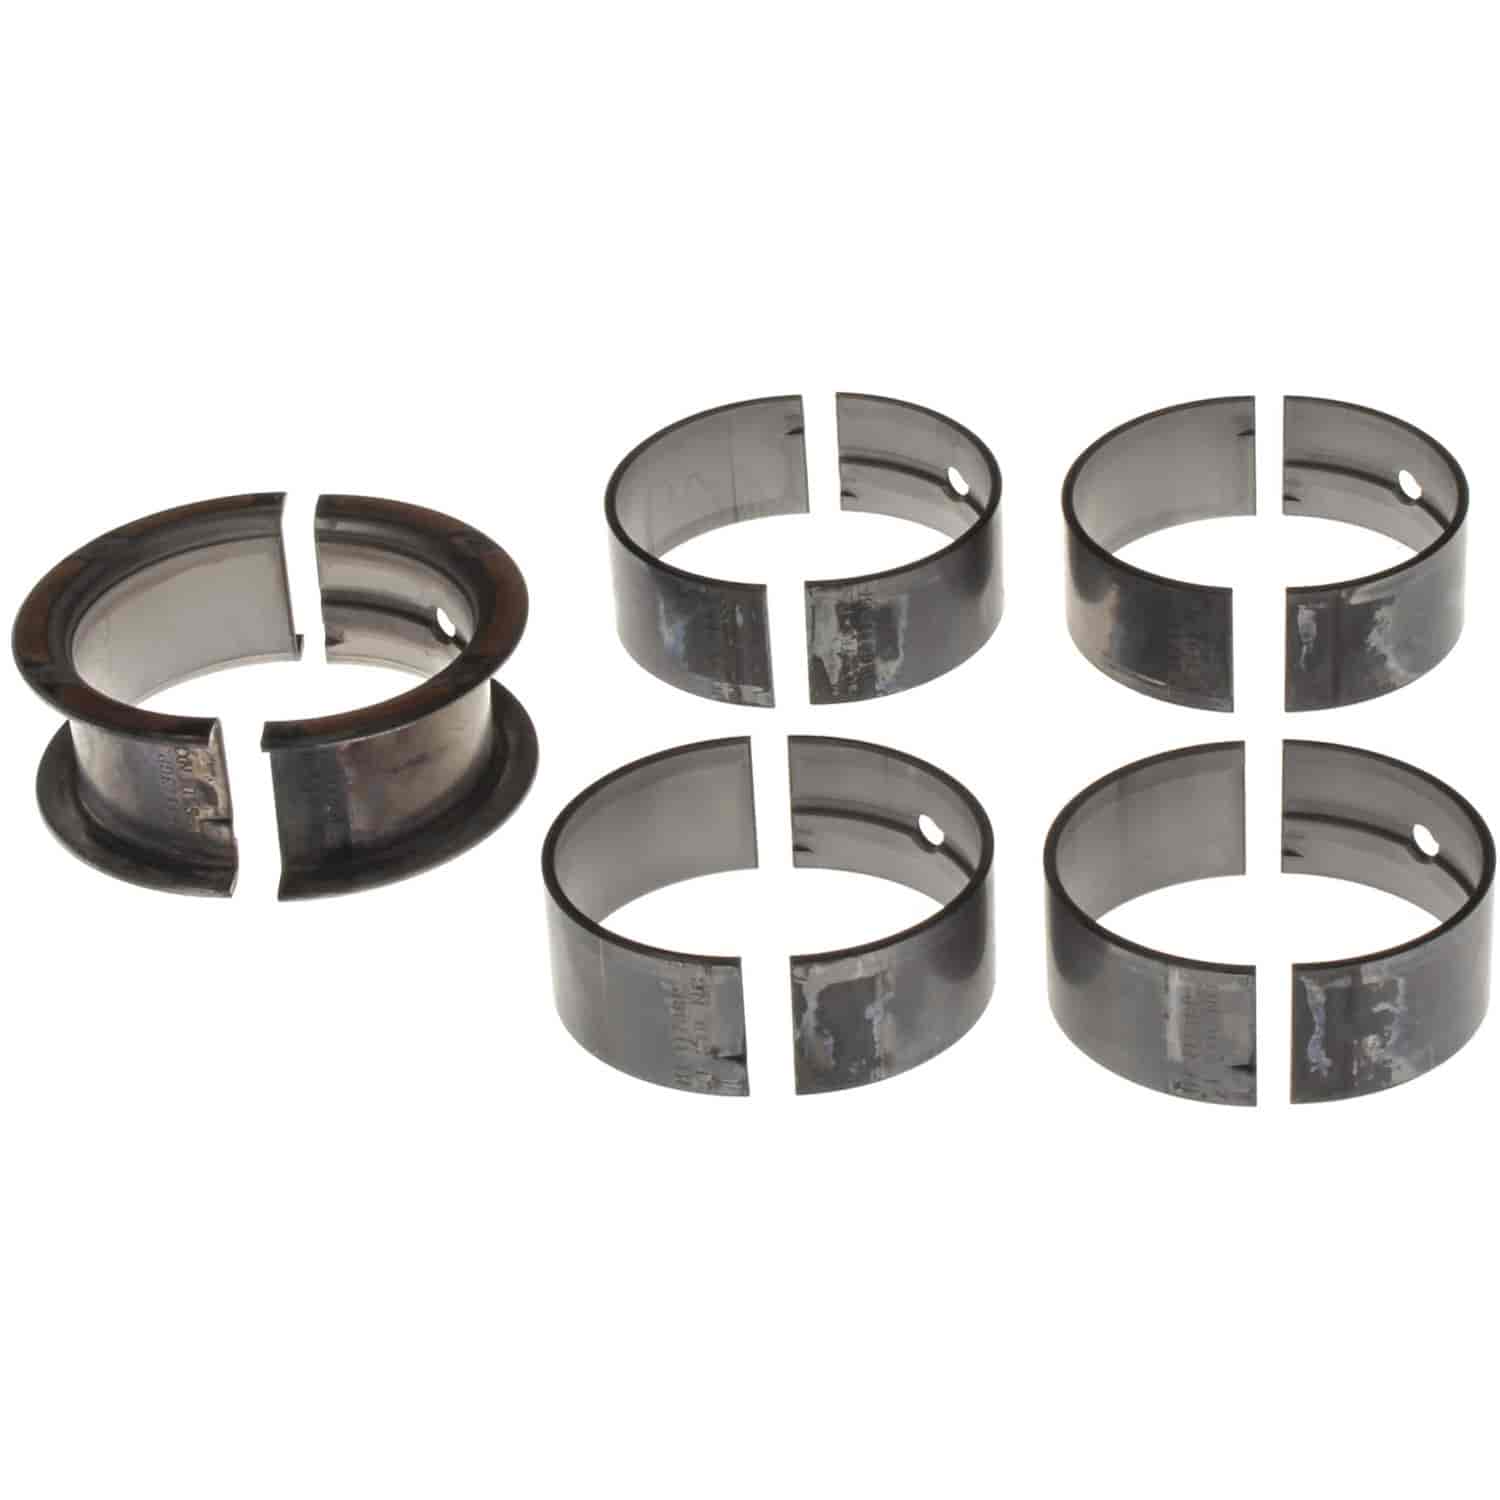 Main Bearing Set Fits Nissan 1982-1989 L4 1.7/1.8/2.0L with -.25mm Undersize